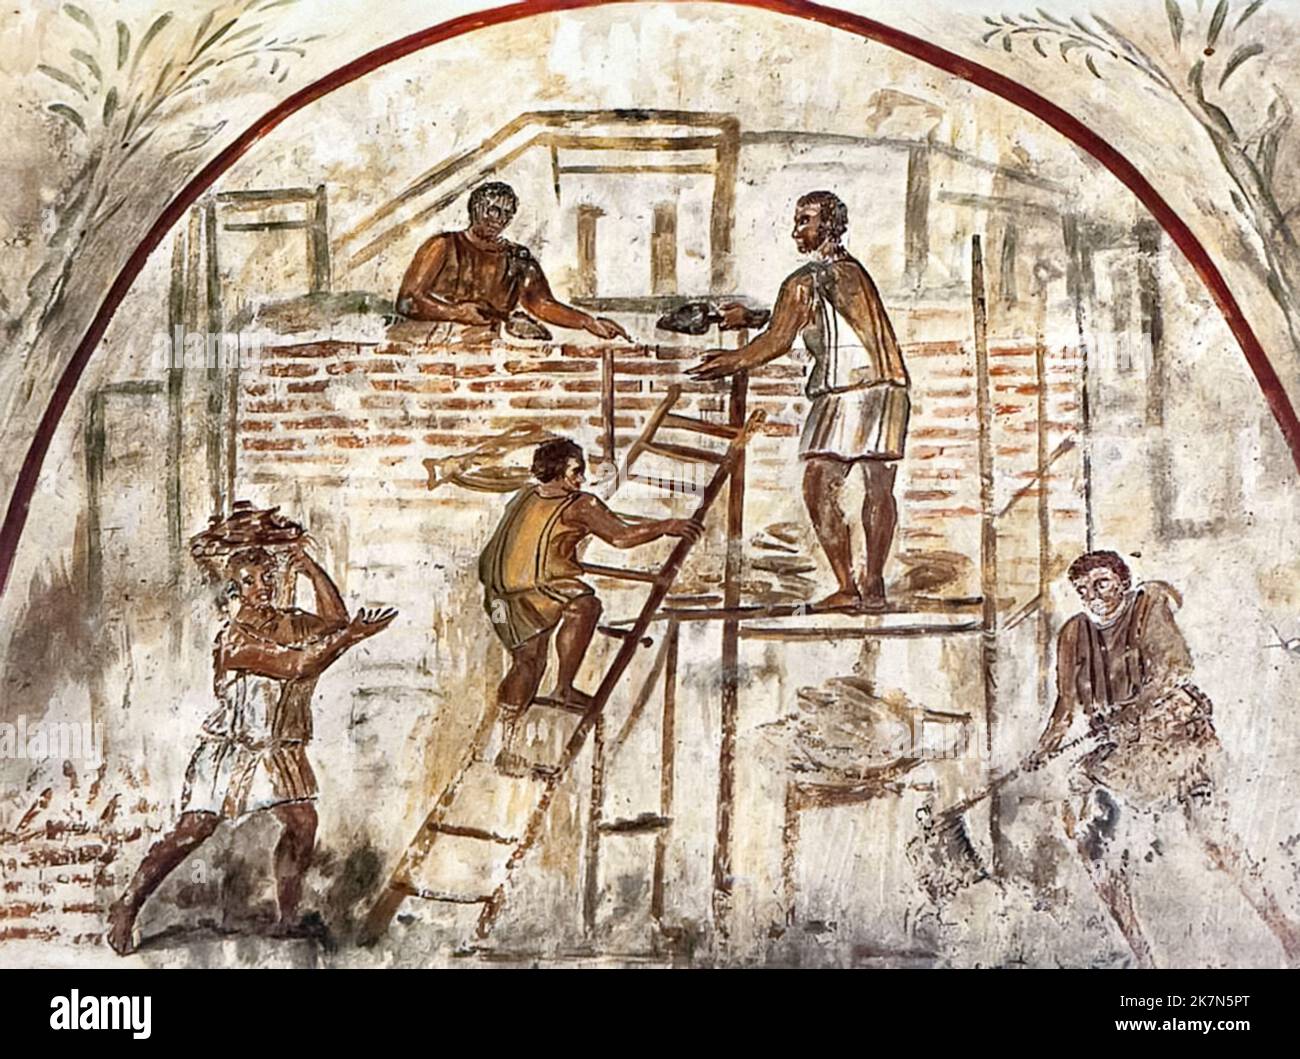 Roman wall painting showing the construction of a villa located in the 4th century tomb of Trebius Justus, Via Latina, Rome, Italy. Stock Photo